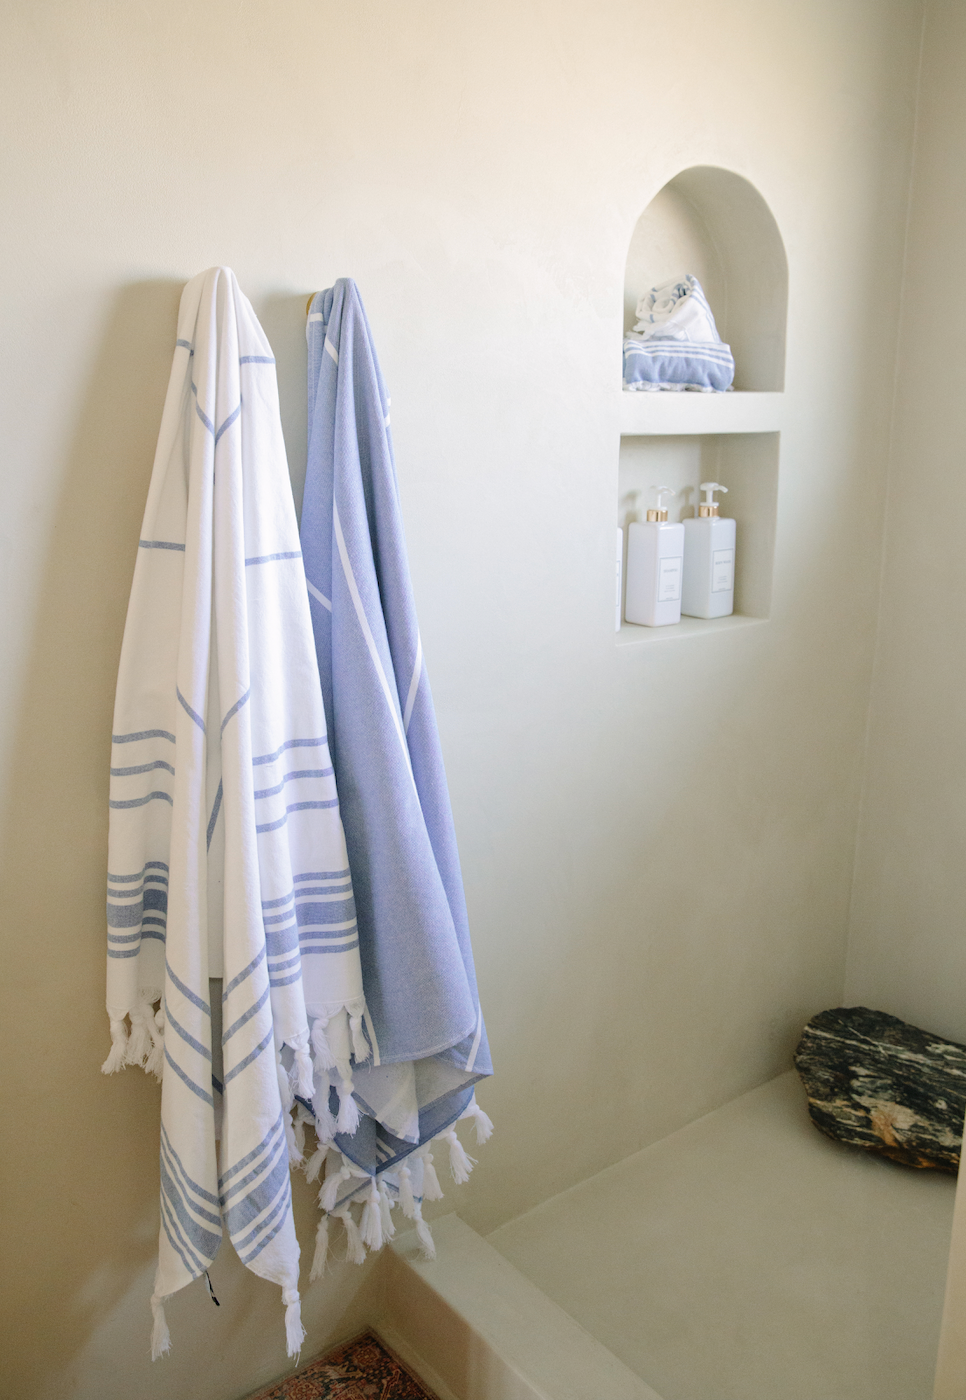 A pair of Turkish Towels hanging on the wall of a bathroom.